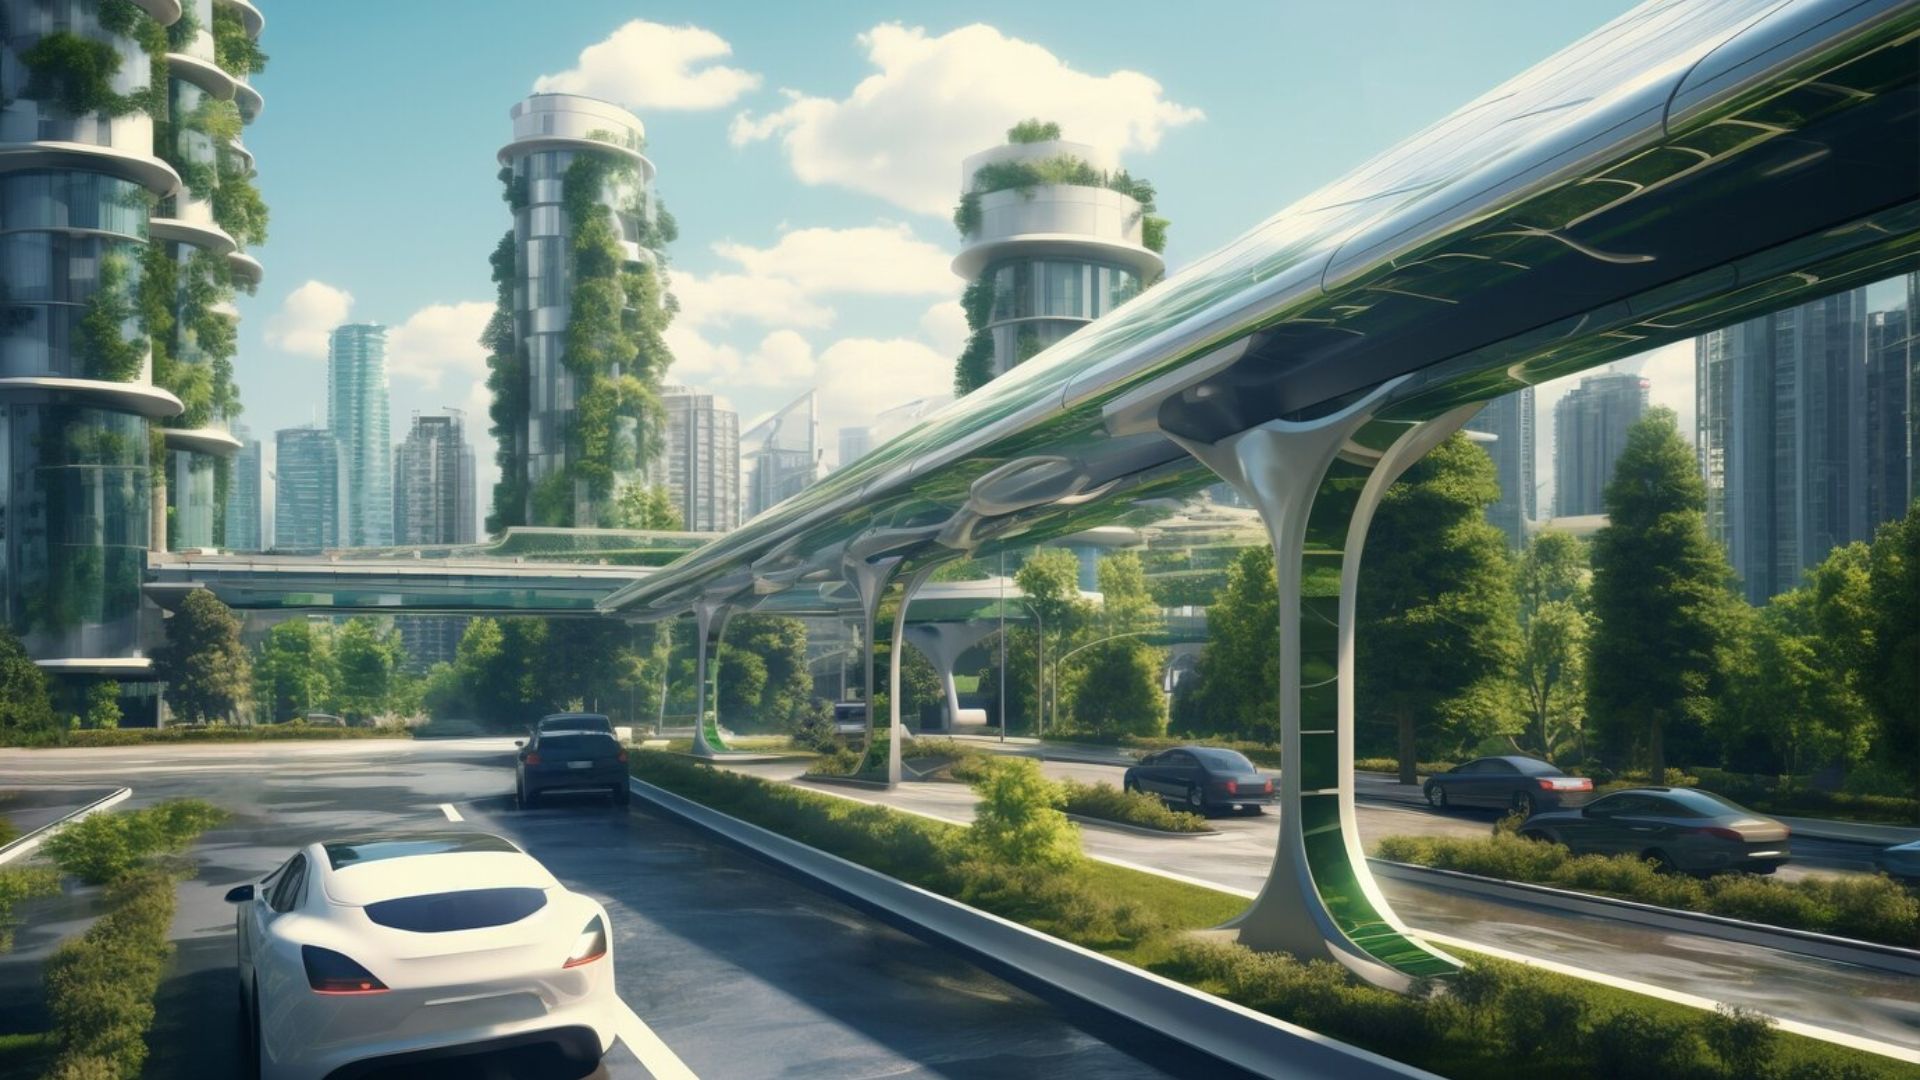 Urban Planning and Infrastructure for Automated Vehicles